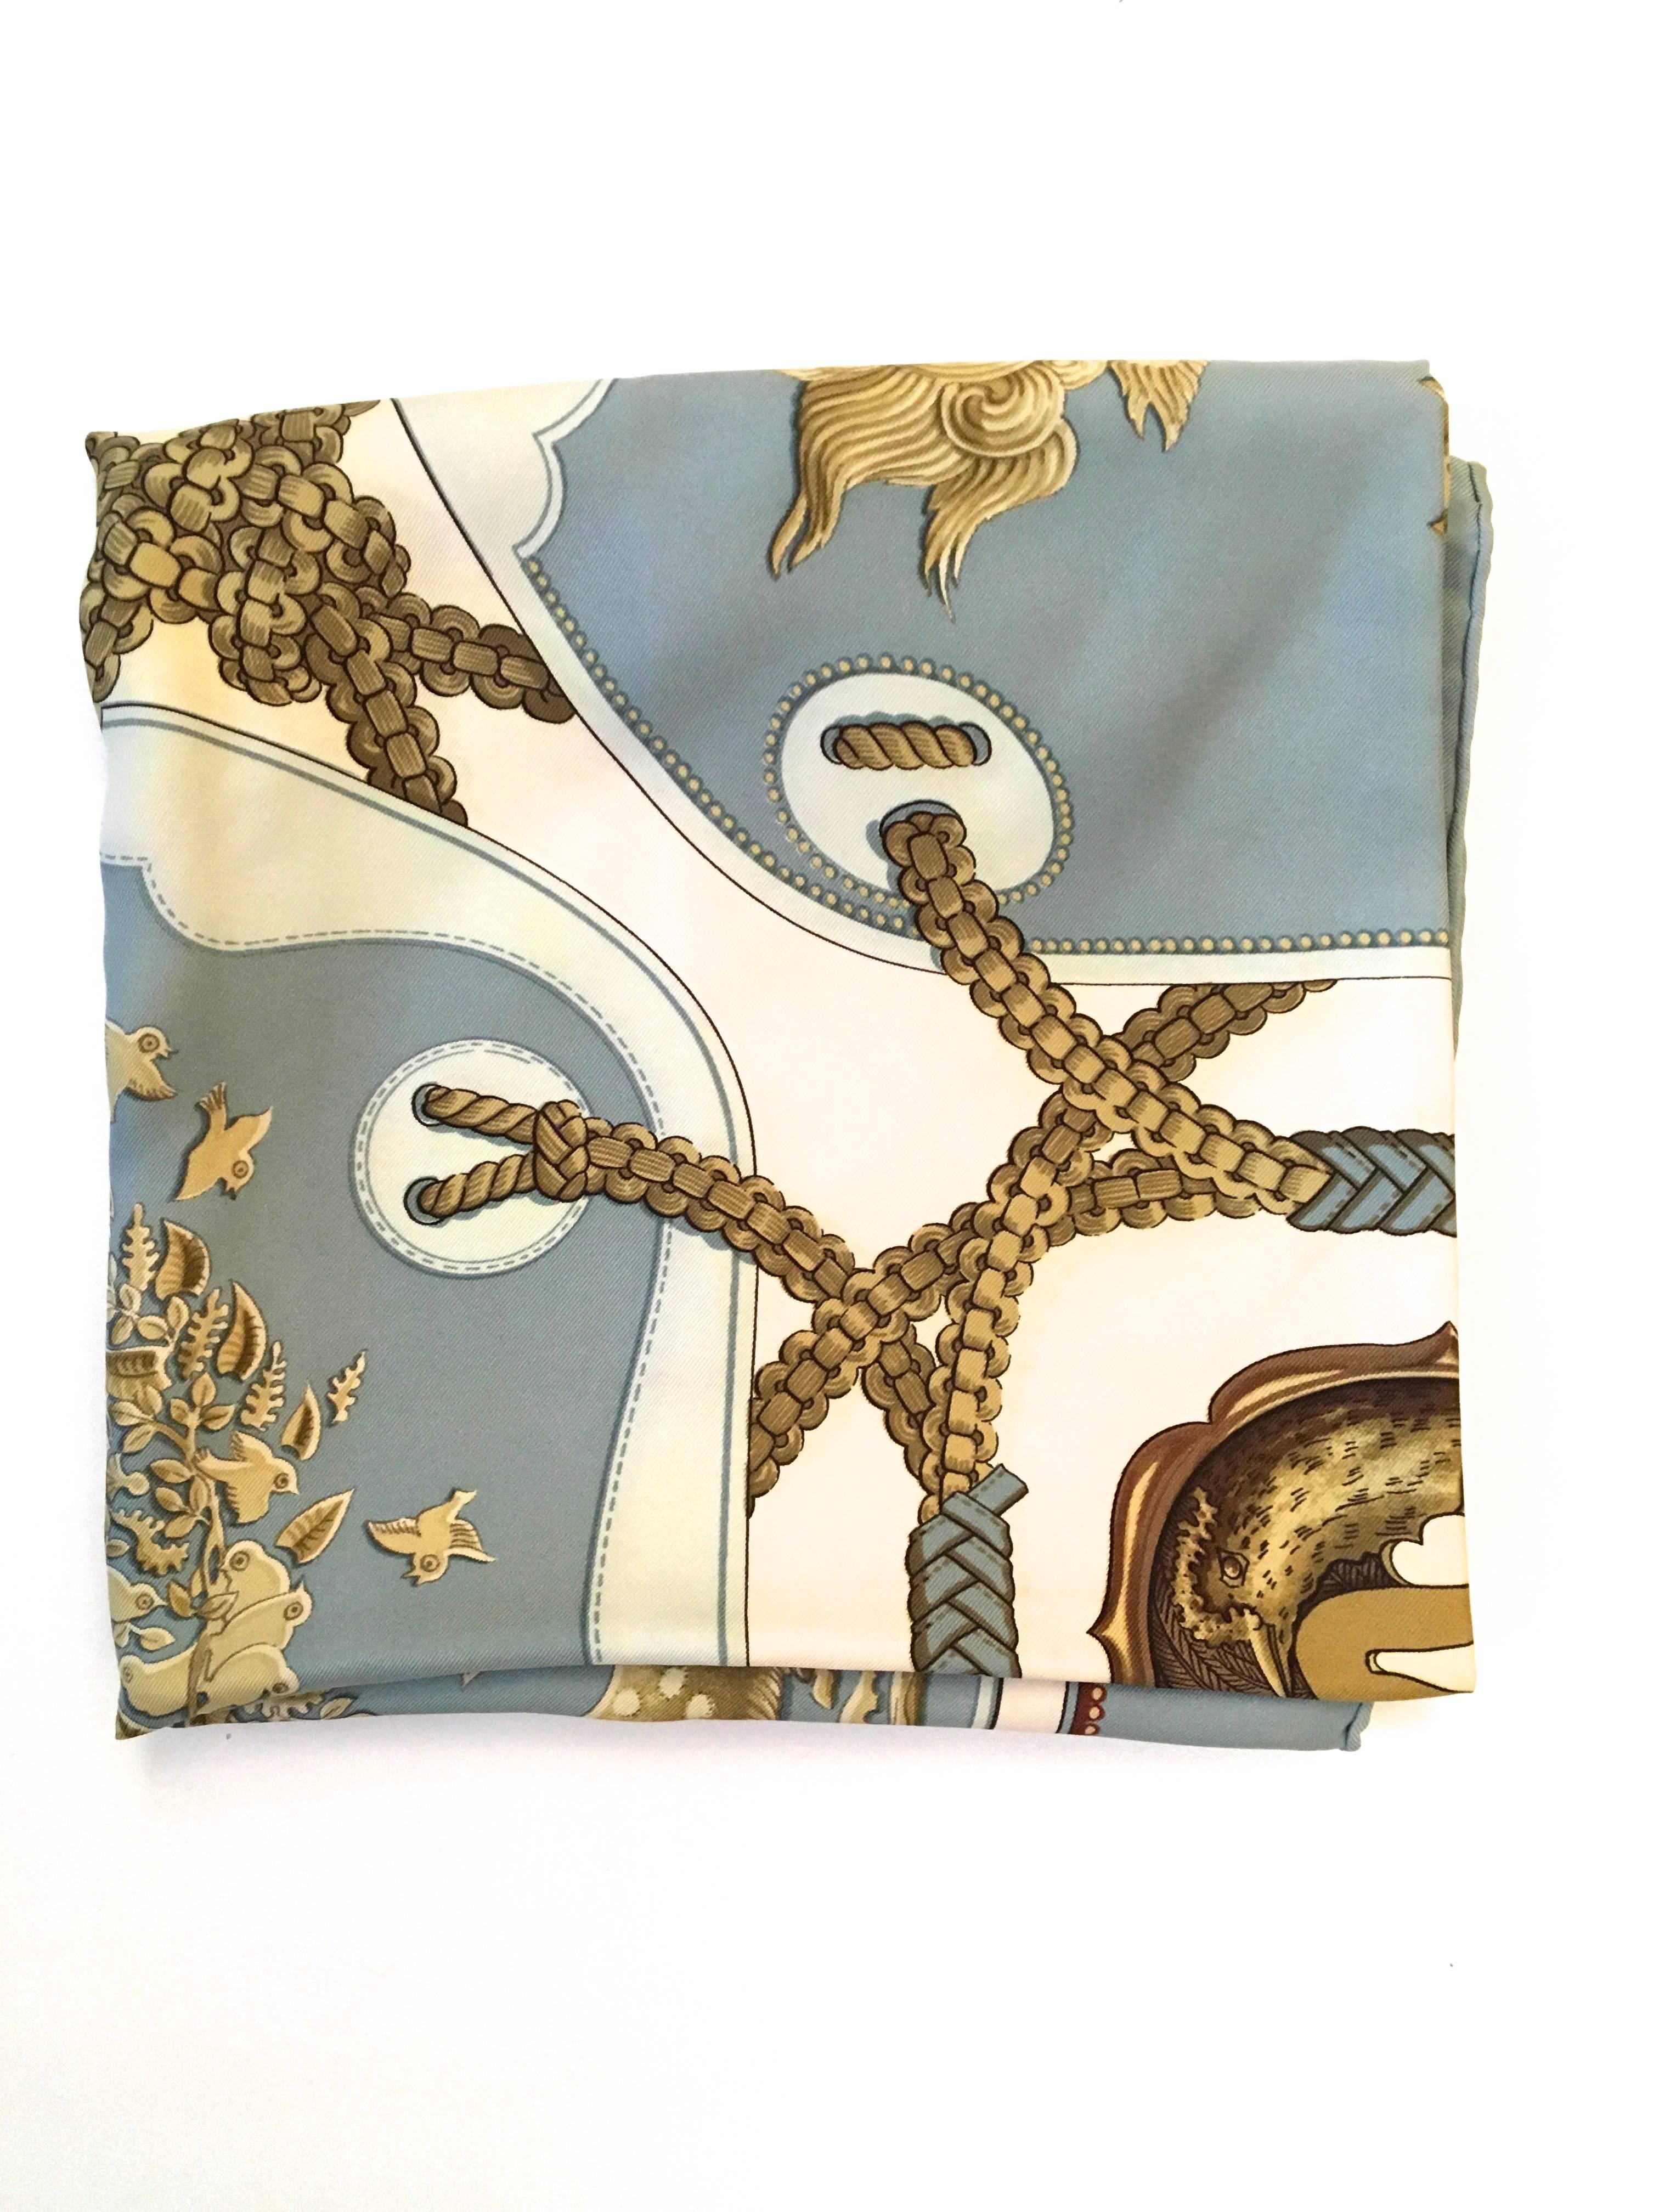 Presented here is a beautiful vintage Hermes scarf. The scarf is 100% silk and is comprised of shades of gray, gold, white, creamy white, browns, blues and blacks. The scarf is a gorgeous print comprised of an interlocking rope and tassel design. In